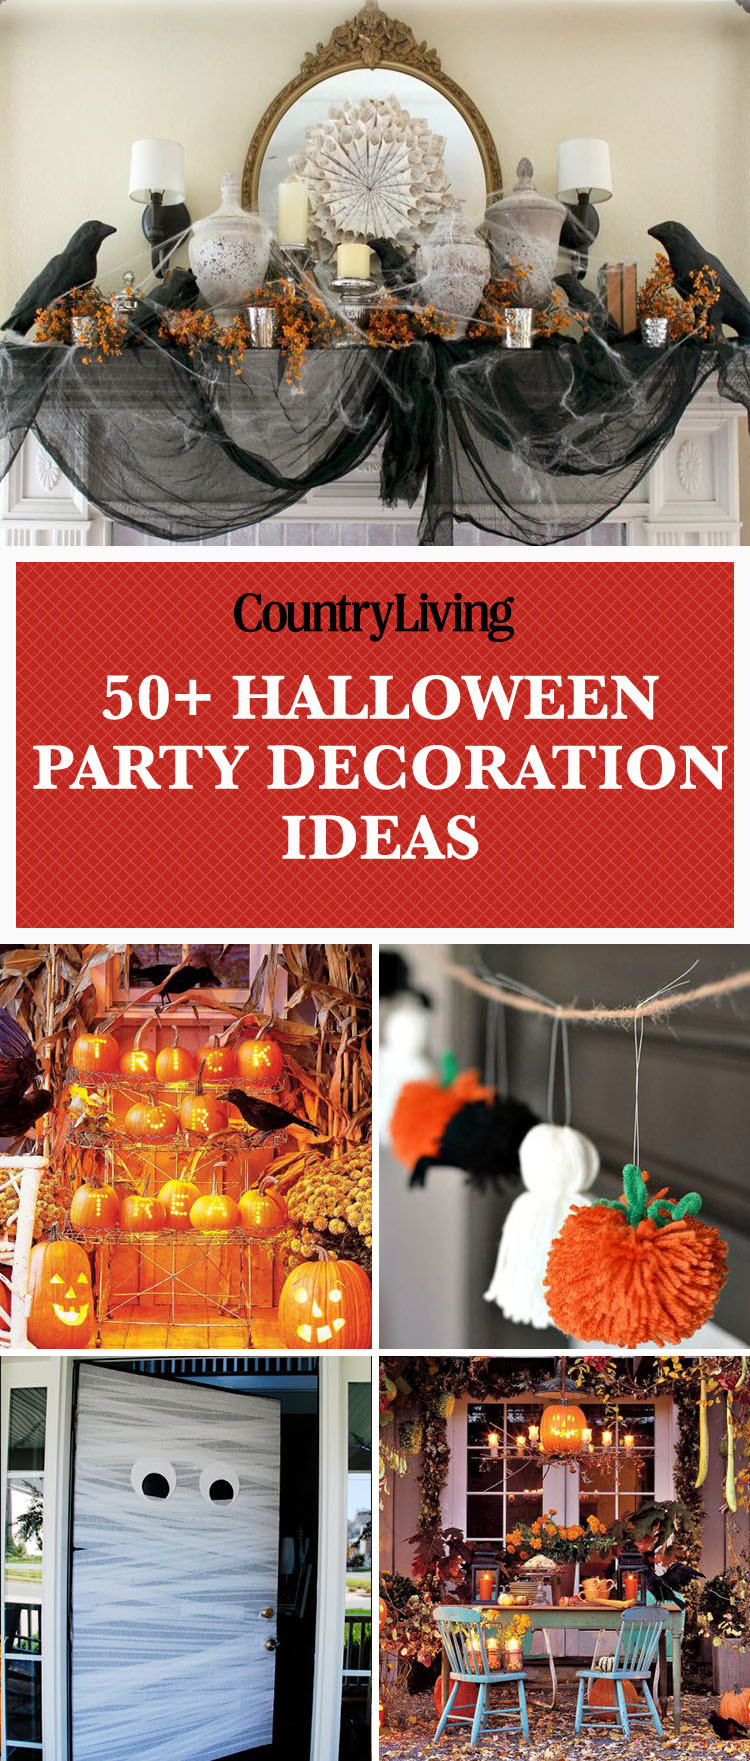 Scary Ideas For Halloween Party
 56 Fun Halloween Party Decorating Ideas Spooky Halloween